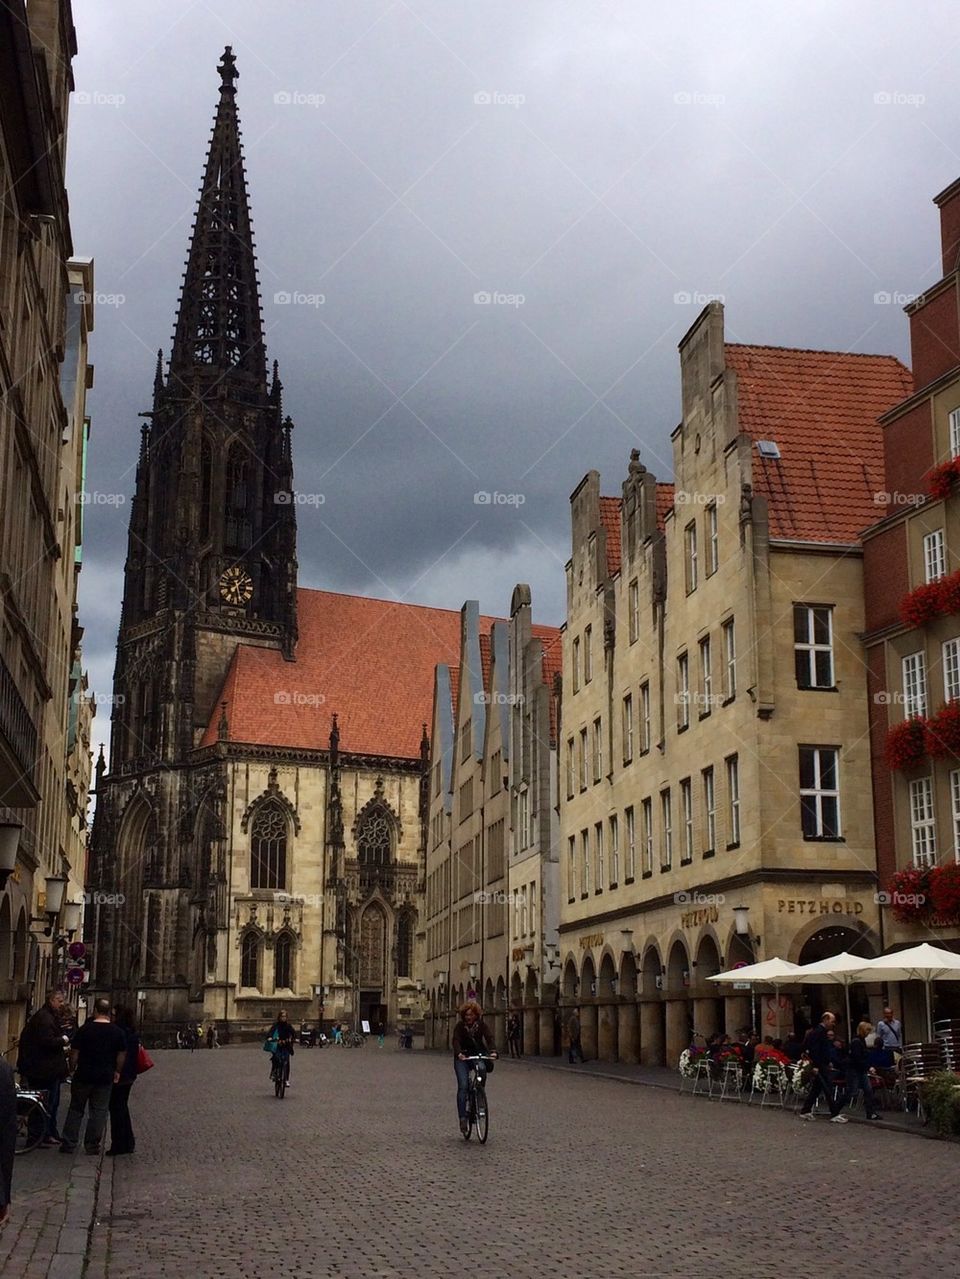 A Rainy Day in Muenster